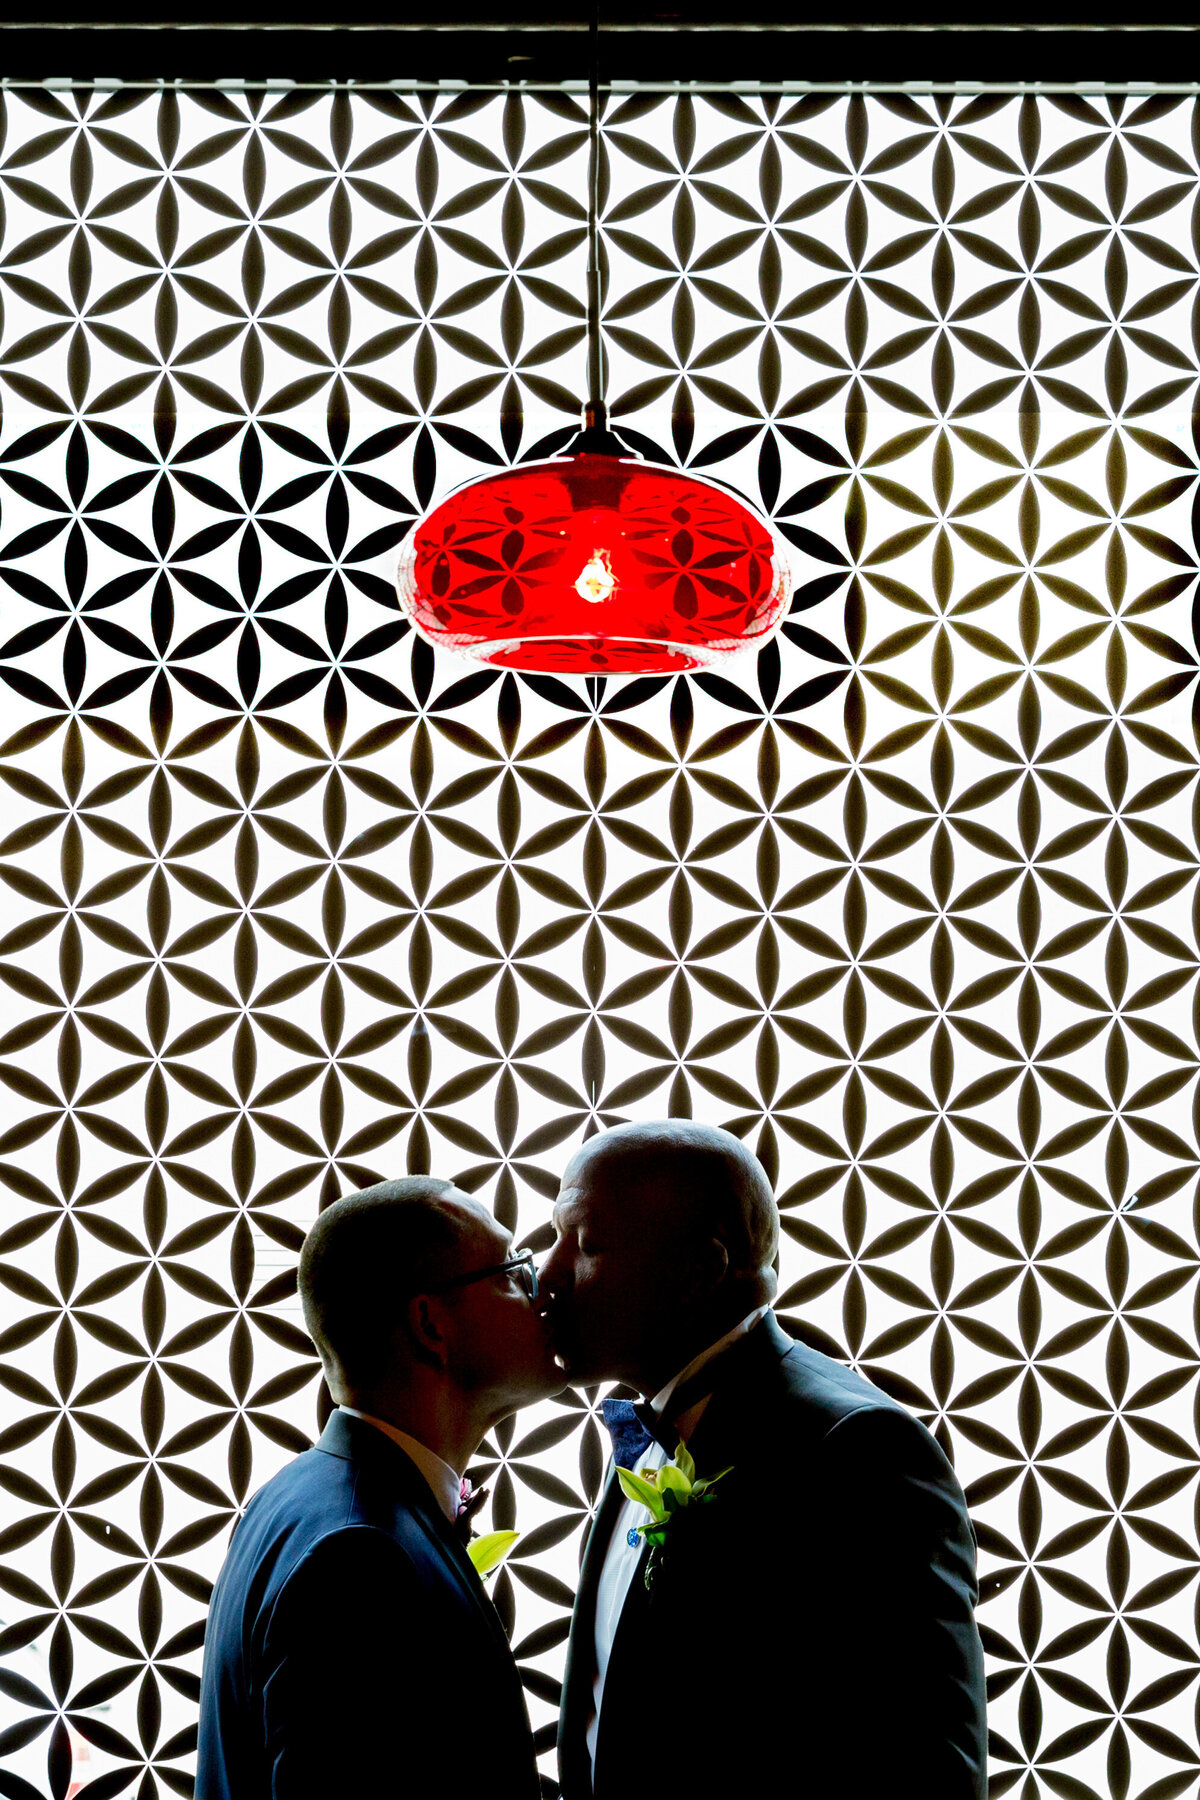 Two grooms kissing in front of a black and white patterned wall.